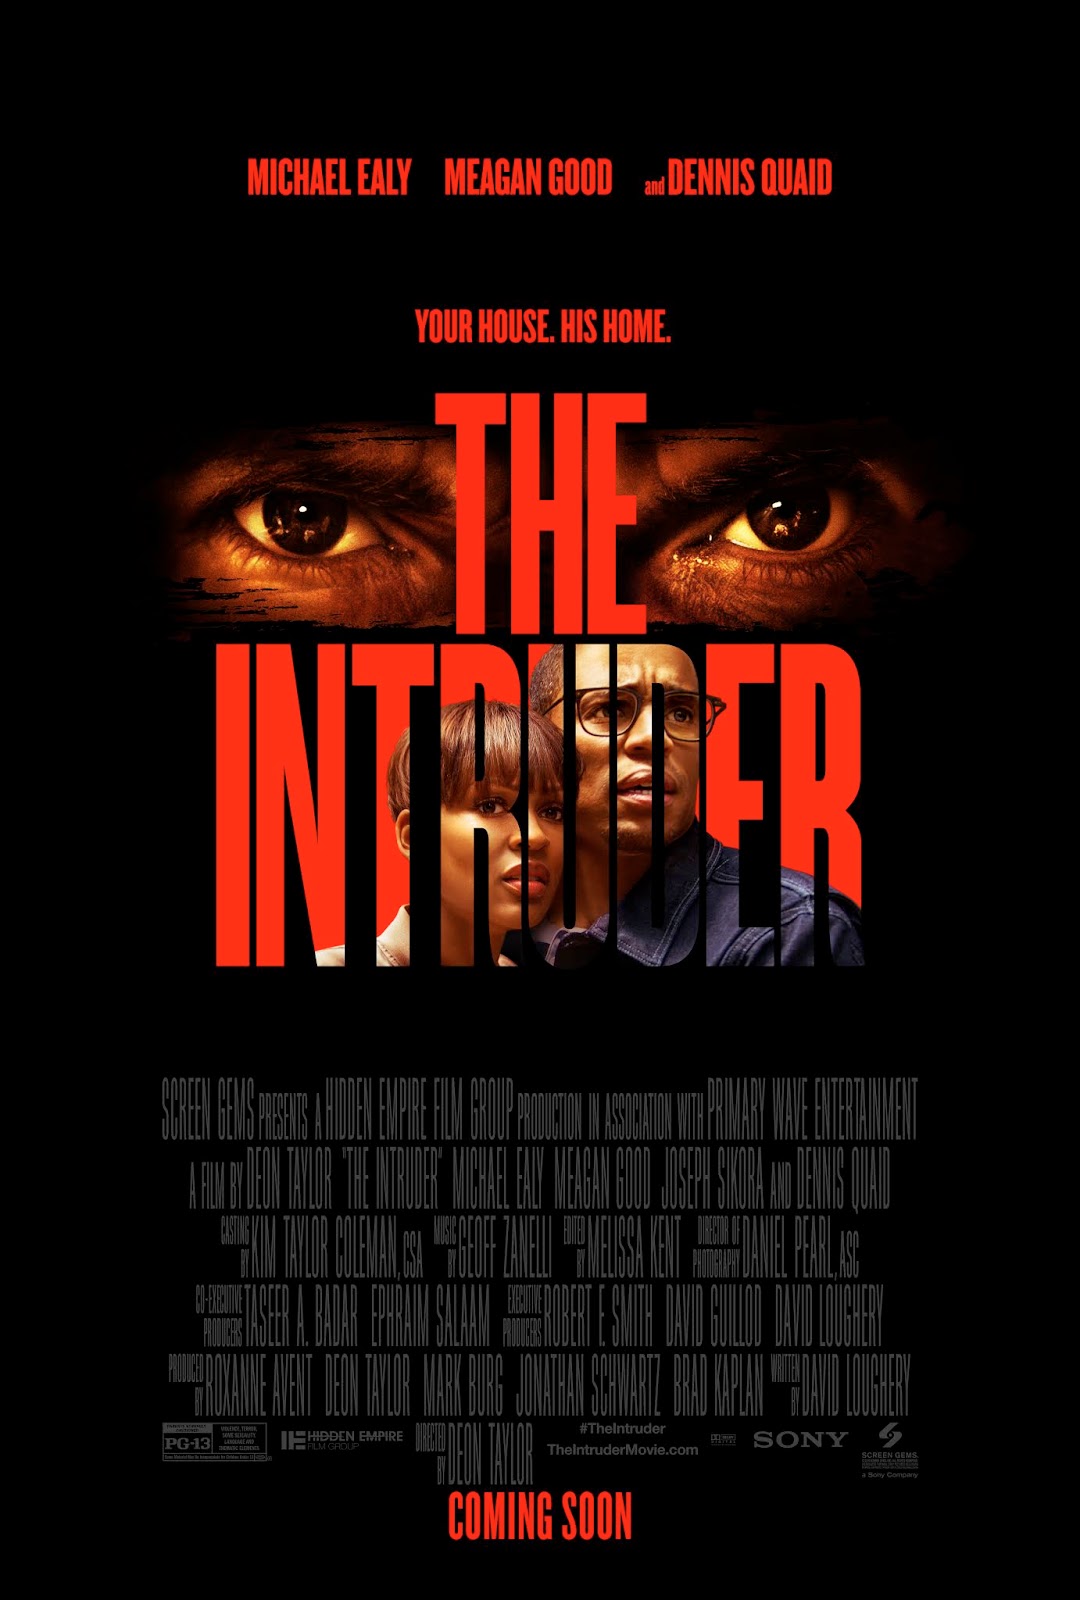 Detroit Giveaway 25 Admit Two Passes For The Intruder 4 30 At Mjr Troy